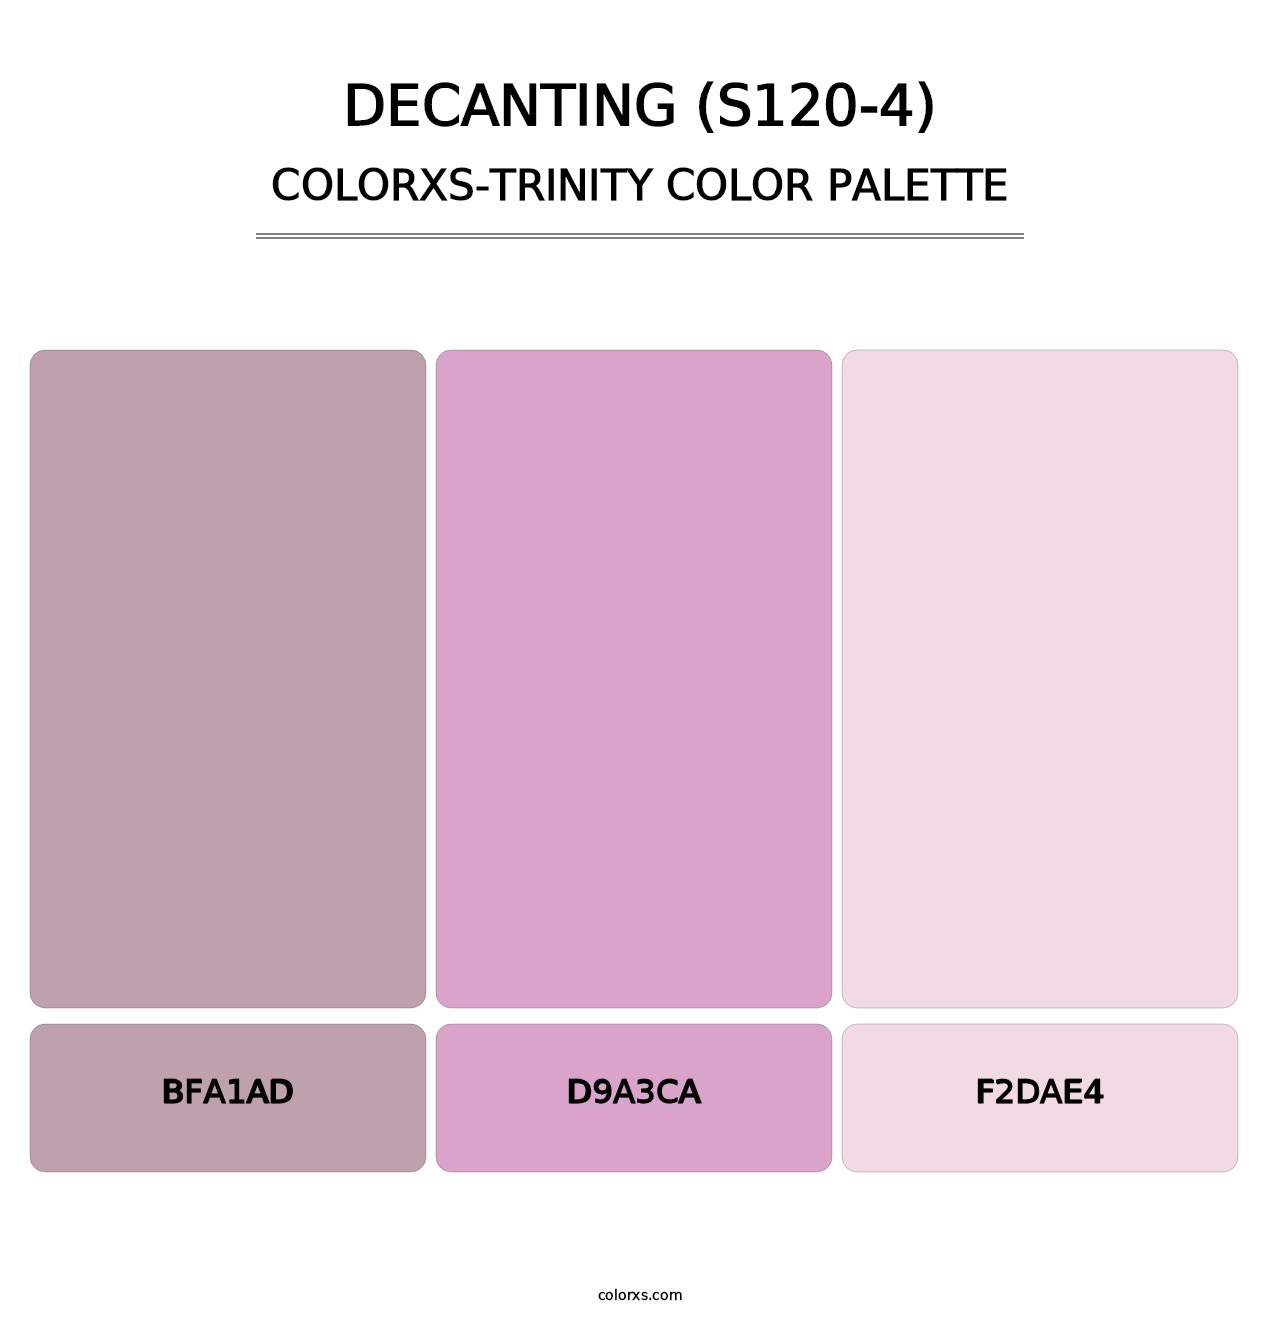 Decanting (S120-4) - Colorxs Trinity Palette